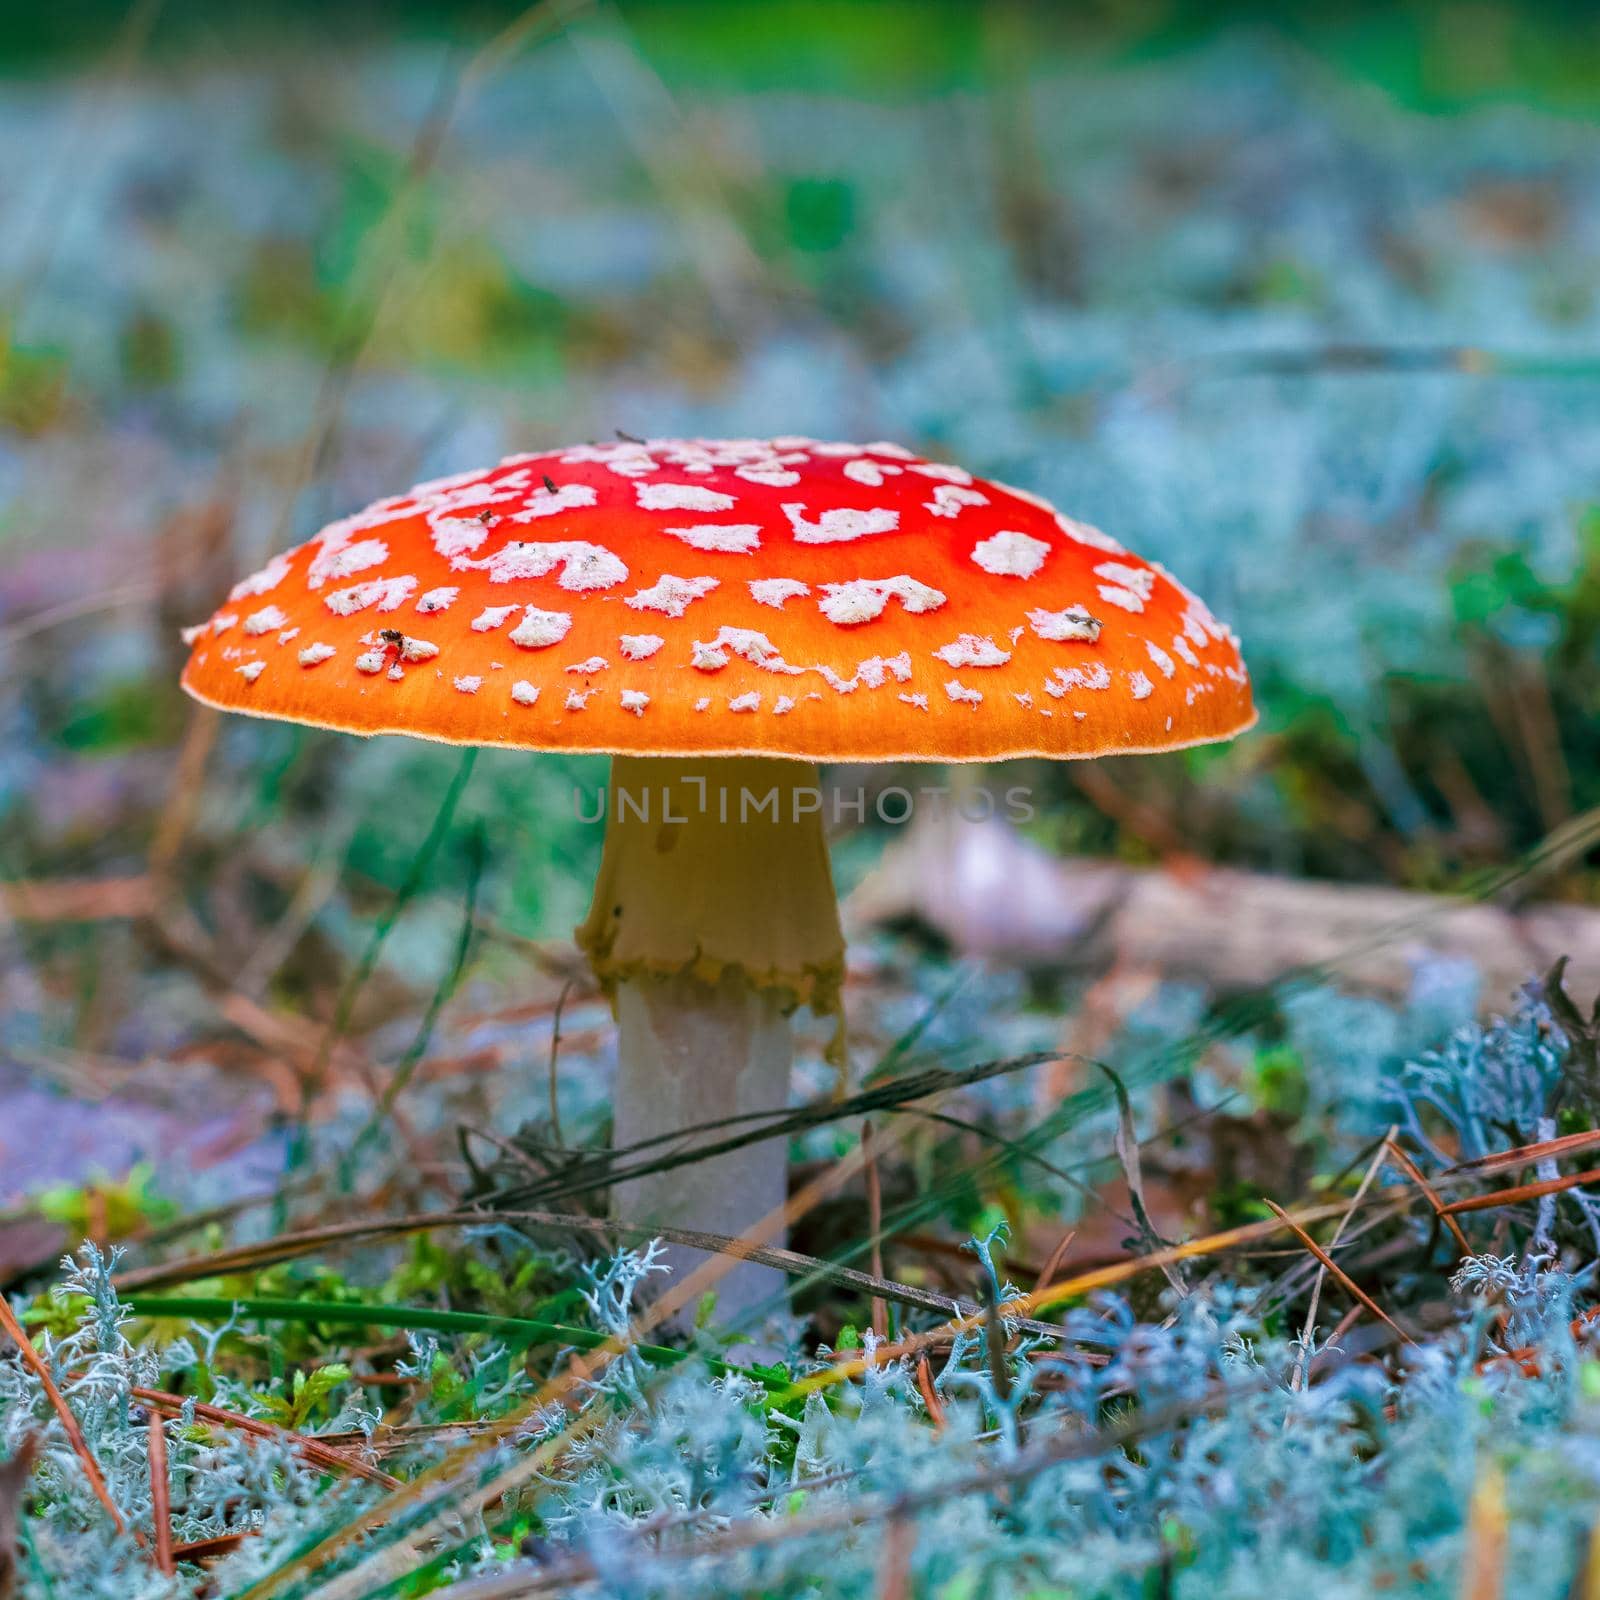 Amanita Muscaria. Red poisonous Fly Agaric mushroom in forest